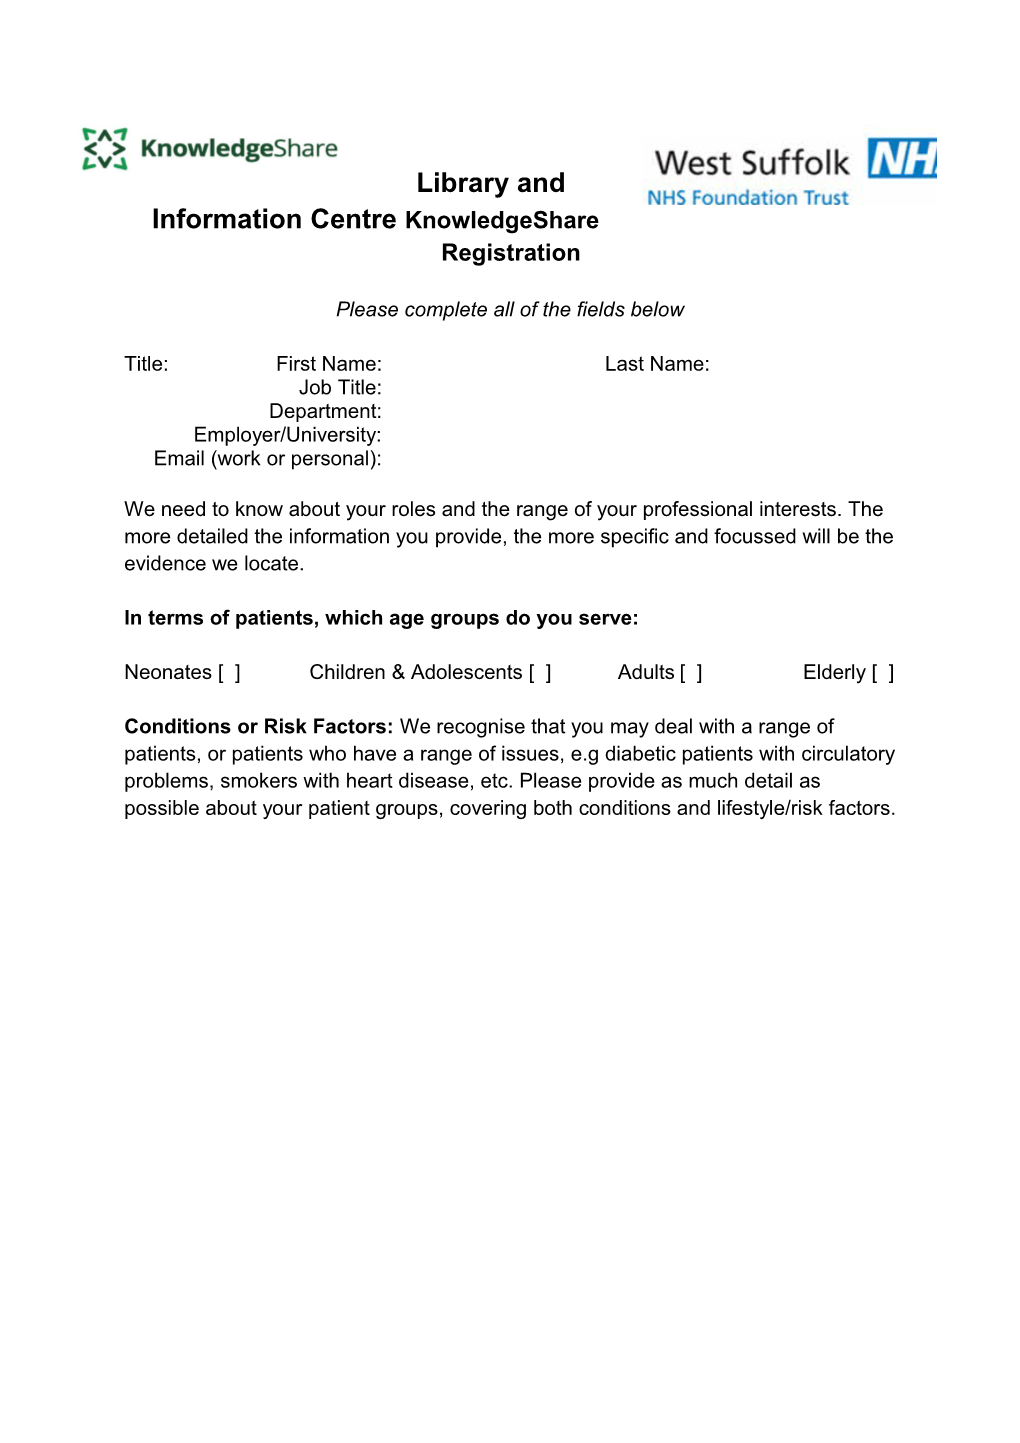 Library and Information Centre Knowledgeshare Registration